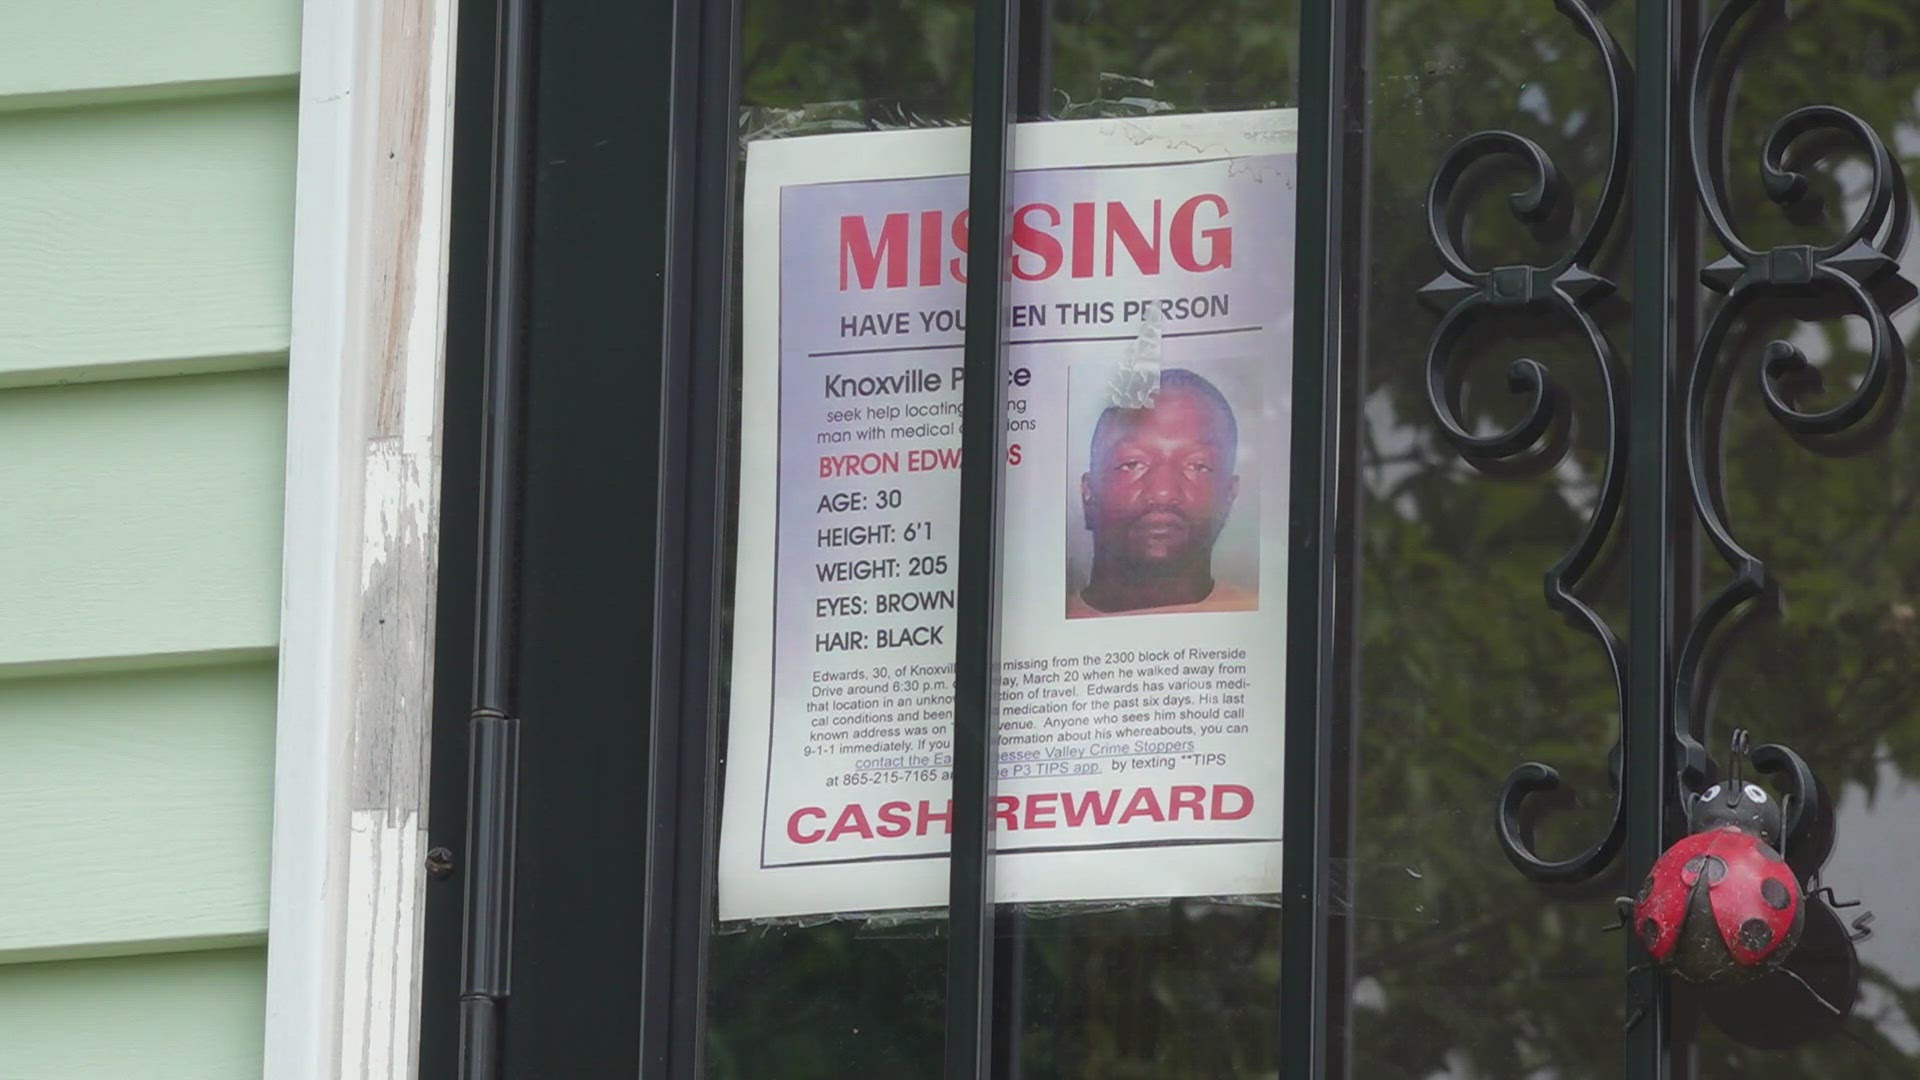 One Knoxville man has been missing for several years with no major developments in his case, but that hasn't stopped Byron Edwards' family from sharing his story.